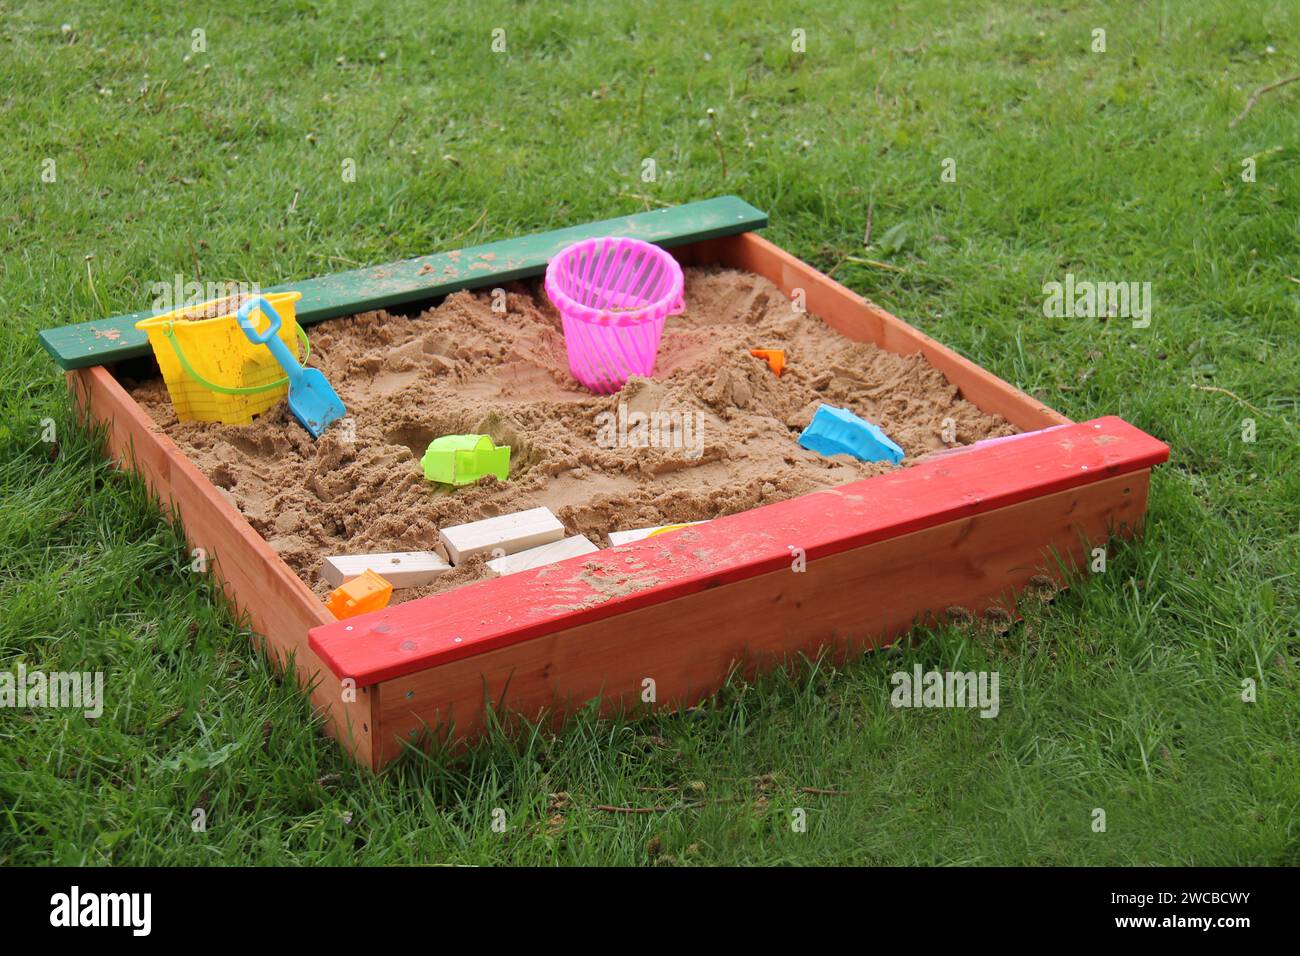 A Wooden Sandpit with Some Plastic and Wood Toys. Stock Photo